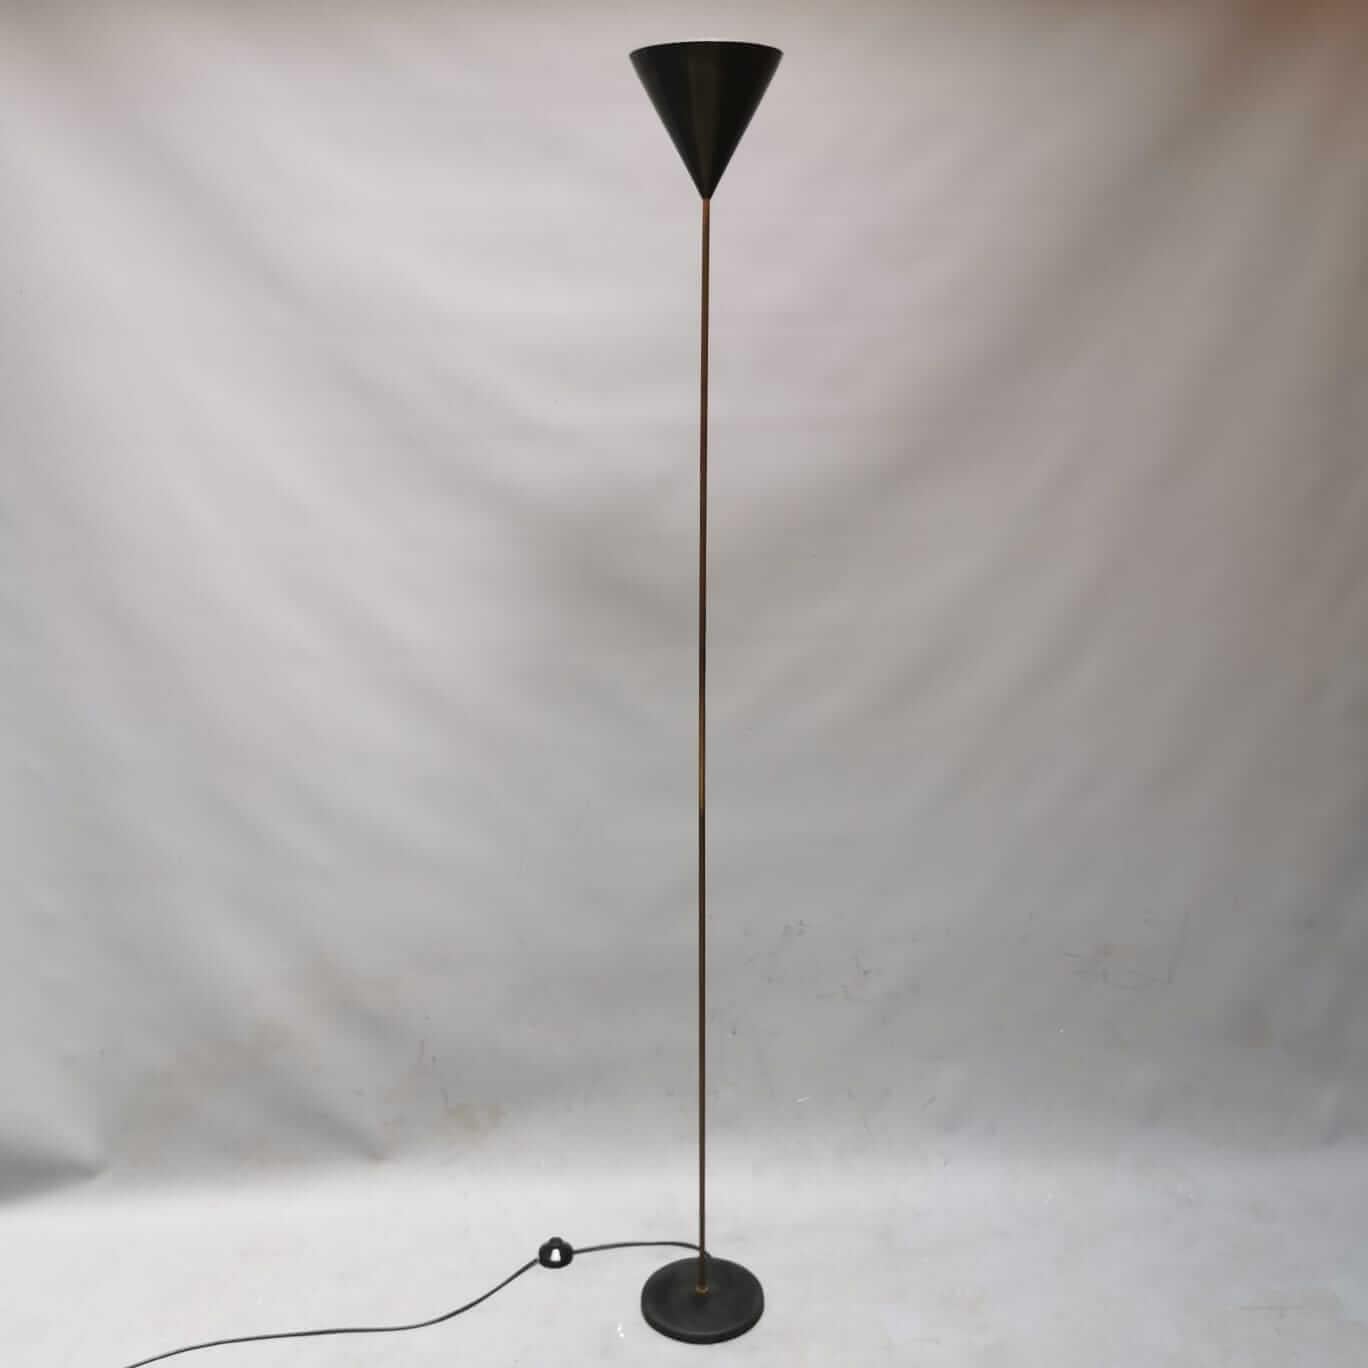 Imbuto floor lamp designed in 1953 by Luigi Caccia Dominioni for Azucena. The name of this lamp also very clearly explains the inspiration from which the shape originates: a funnel. However, in this object of the funnel only the name remains. The